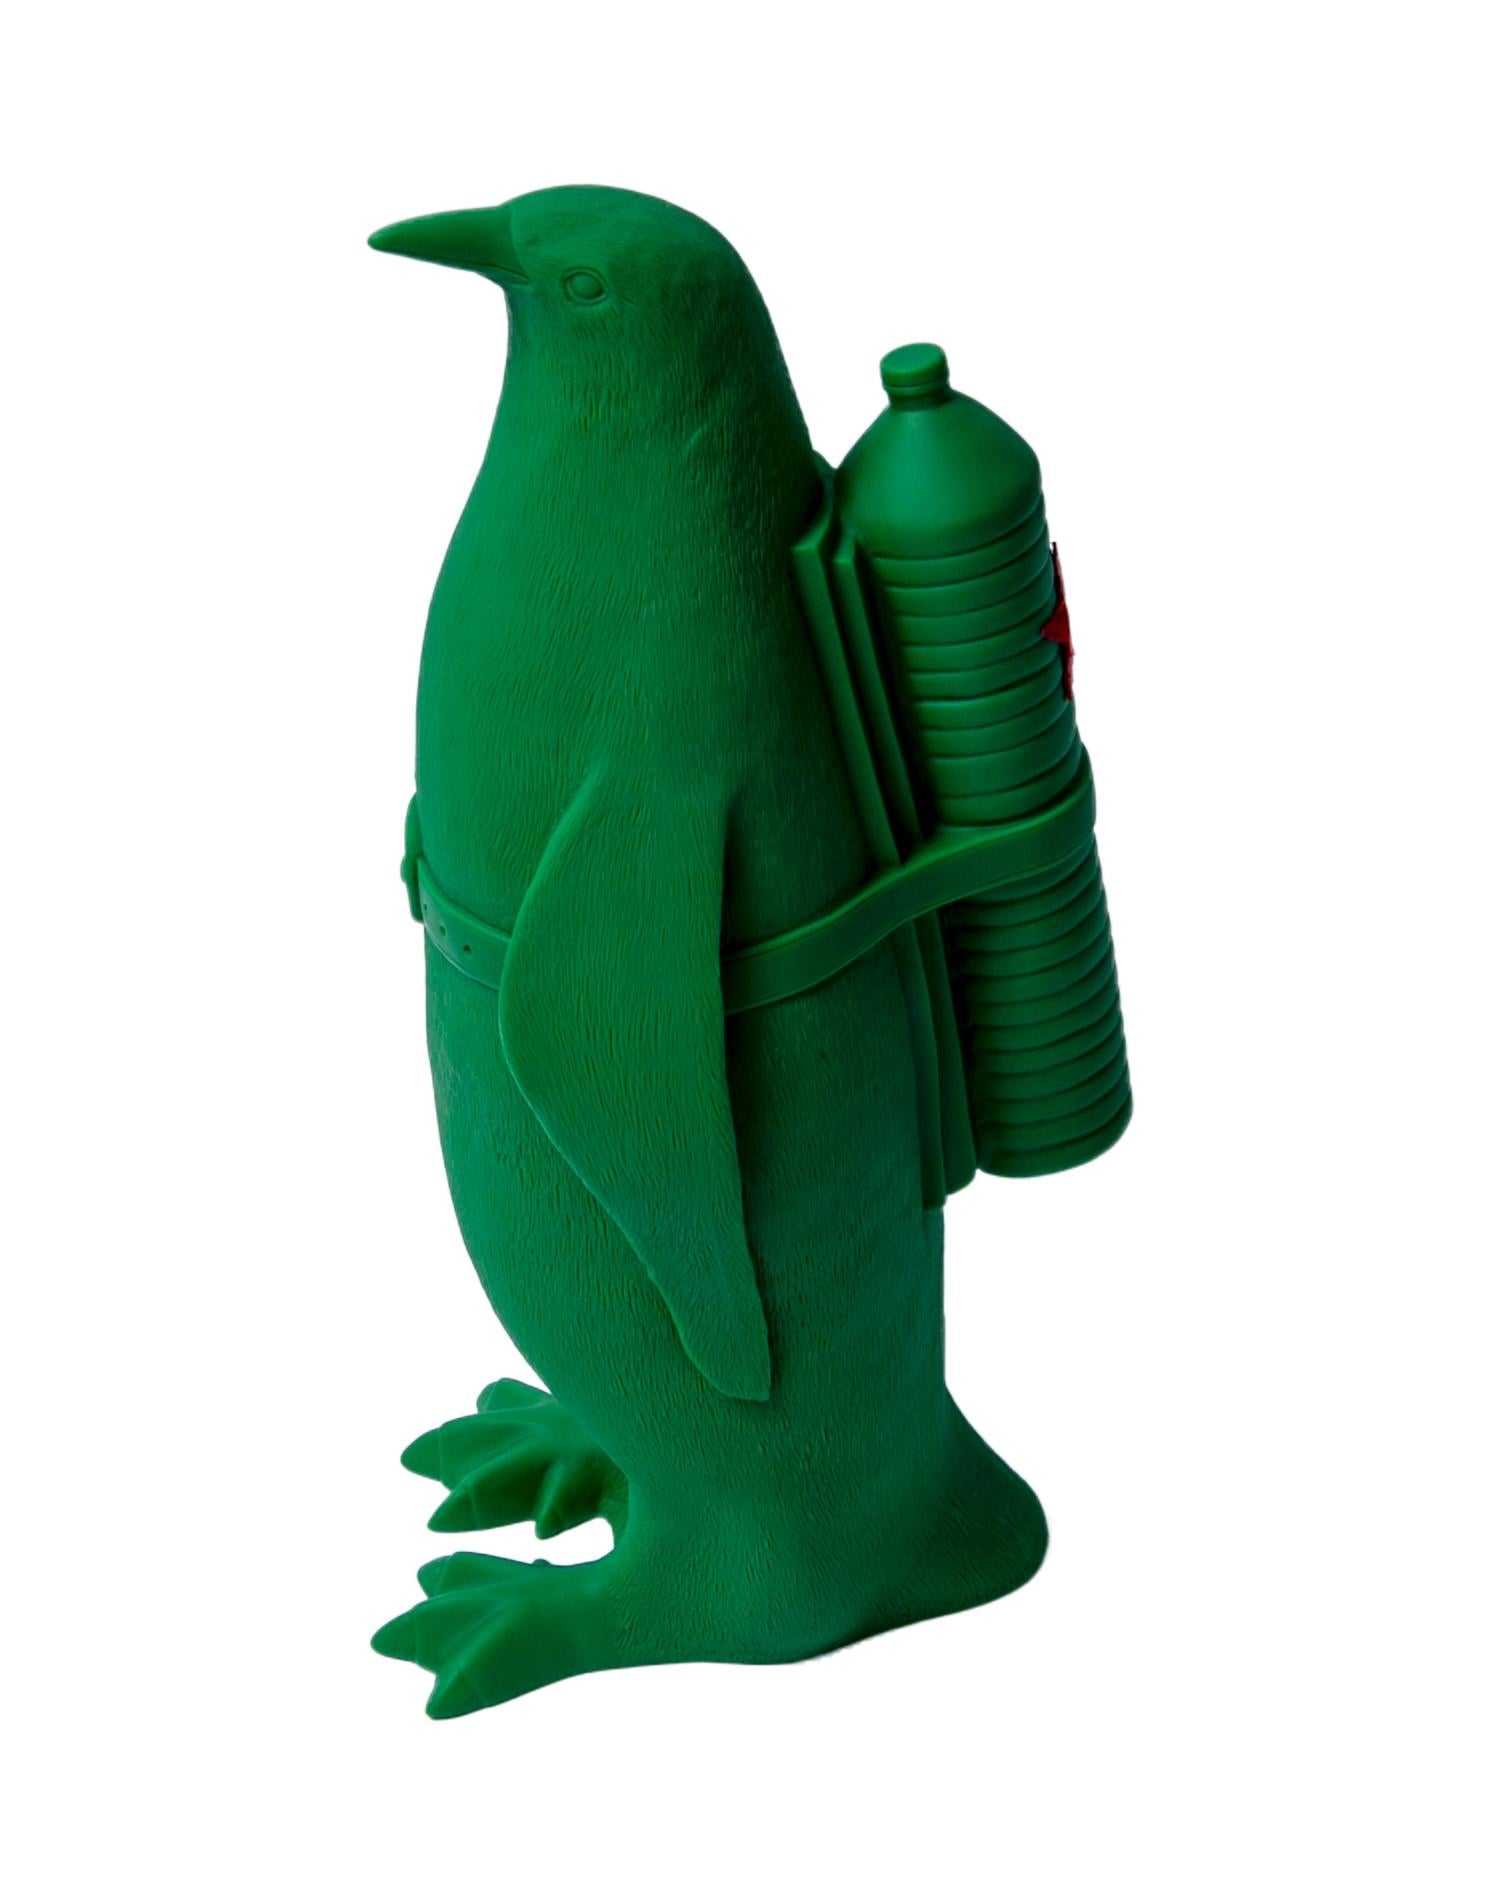 Small Cloned Green Penguin with Water Bottle, Cuban Edition - Pop Art Sculpture by William Sweetlove